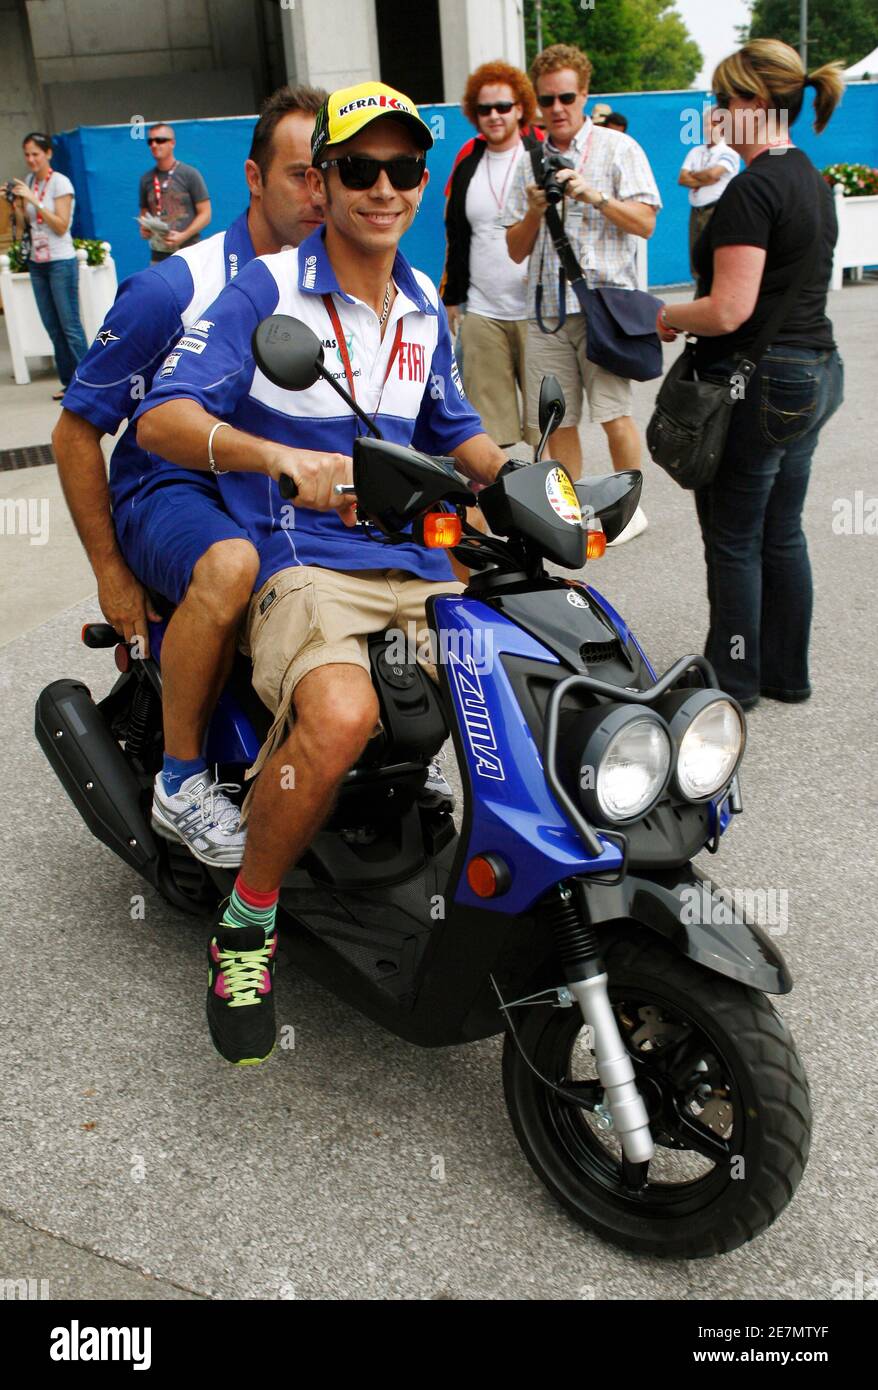 Yamaha MotoGP rider Valentino Rossi of Italy drives a scooter away from his  garage area before Indianapolis Grand Prix practice at the Indianapolis  Motor Speedway in Indianapolis August 28, 2009. REUTERS/Brent Smith (